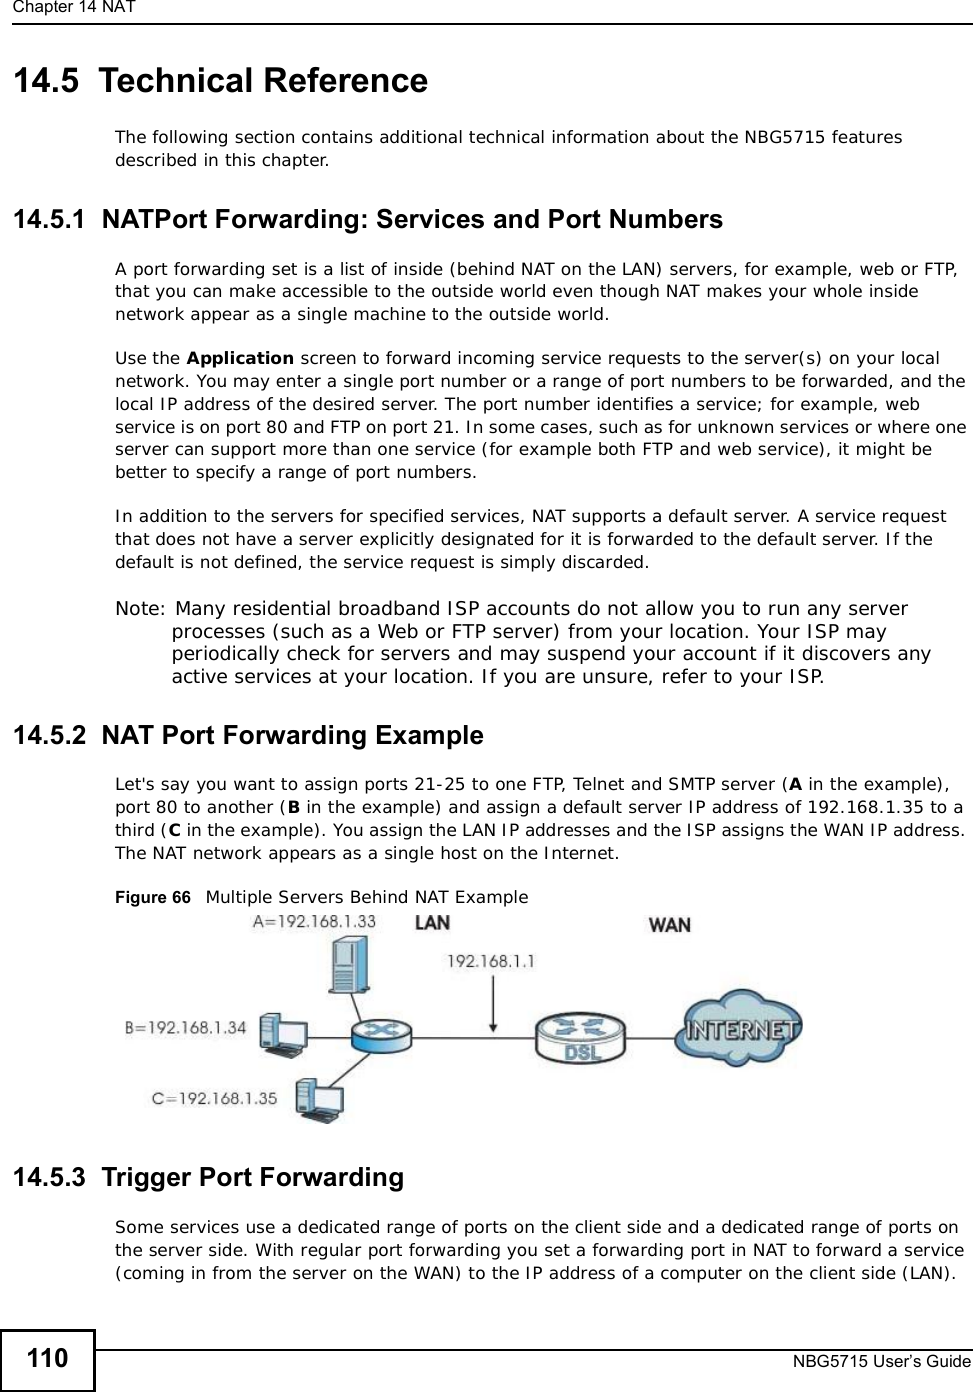 Chapter 14NATNBG5715 User’s Guide11014.5  Technical ReferenceThe following section contains additional technical information about the NBG5715 features described in this chapter.14.5.1  NATPort Forwarding: Services and Port NumbersA port forwarding set is a list of inside (behind NAT on the LAN) servers, for example, web or FTP, that you can make accessible to the outside world even though NAT makes your whole inside network appear as a single machine to the outside world. Use the Application screen to forward incoming service requests to the server(s) on your local network. You may enter a single port number or a range of port numbers to be forwarded, and the local IP address of the desired server. The port number identifies a service; for example, web service is on port 80 and FTP on port 21. In some cases, such as for unknown services or where one server can support more than one service (for example both FTP and web service), it might be better to specify a range of port numbers.In addition to the servers for specified services, NAT supports a default server. A service request that does not have a server explicitly designated for it is forwarded to the default server. If the default is not defined, the service request is simply discarded.Note: Many residential broadband ISP accounts do not allow you to run any server processes (such as a Web or FTP server) from your location. Your ISP may periodically check for servers and may suspend your account if it discovers any active services at your location. If you are unsure, refer to your ISP.14.5.2  NAT Port Forwarding ExampleLet&apos;s say you want to assign ports 21-25 to one FTP, Telnet and SMTP server (A in the example), port 80 to another (B in the example) and assign a default server IP address of 192.168.1.35 to a third (C in the example). You assign the LAN IP addresses and the ISP assigns the WAN IP address. The NAT network appears as a single host on the Internet.Figure 66   Multiple Servers Behind NAT Example14.5.3  Trigger Port Forwarding Some services use a dedicated range of ports on the client side and a dedicated range of ports on the server side. With regular port forwarding you set a forwarding port in NAT to forward a service (coming in from the server on the WAN) to the IP address of a computer on the client side (LAN). 